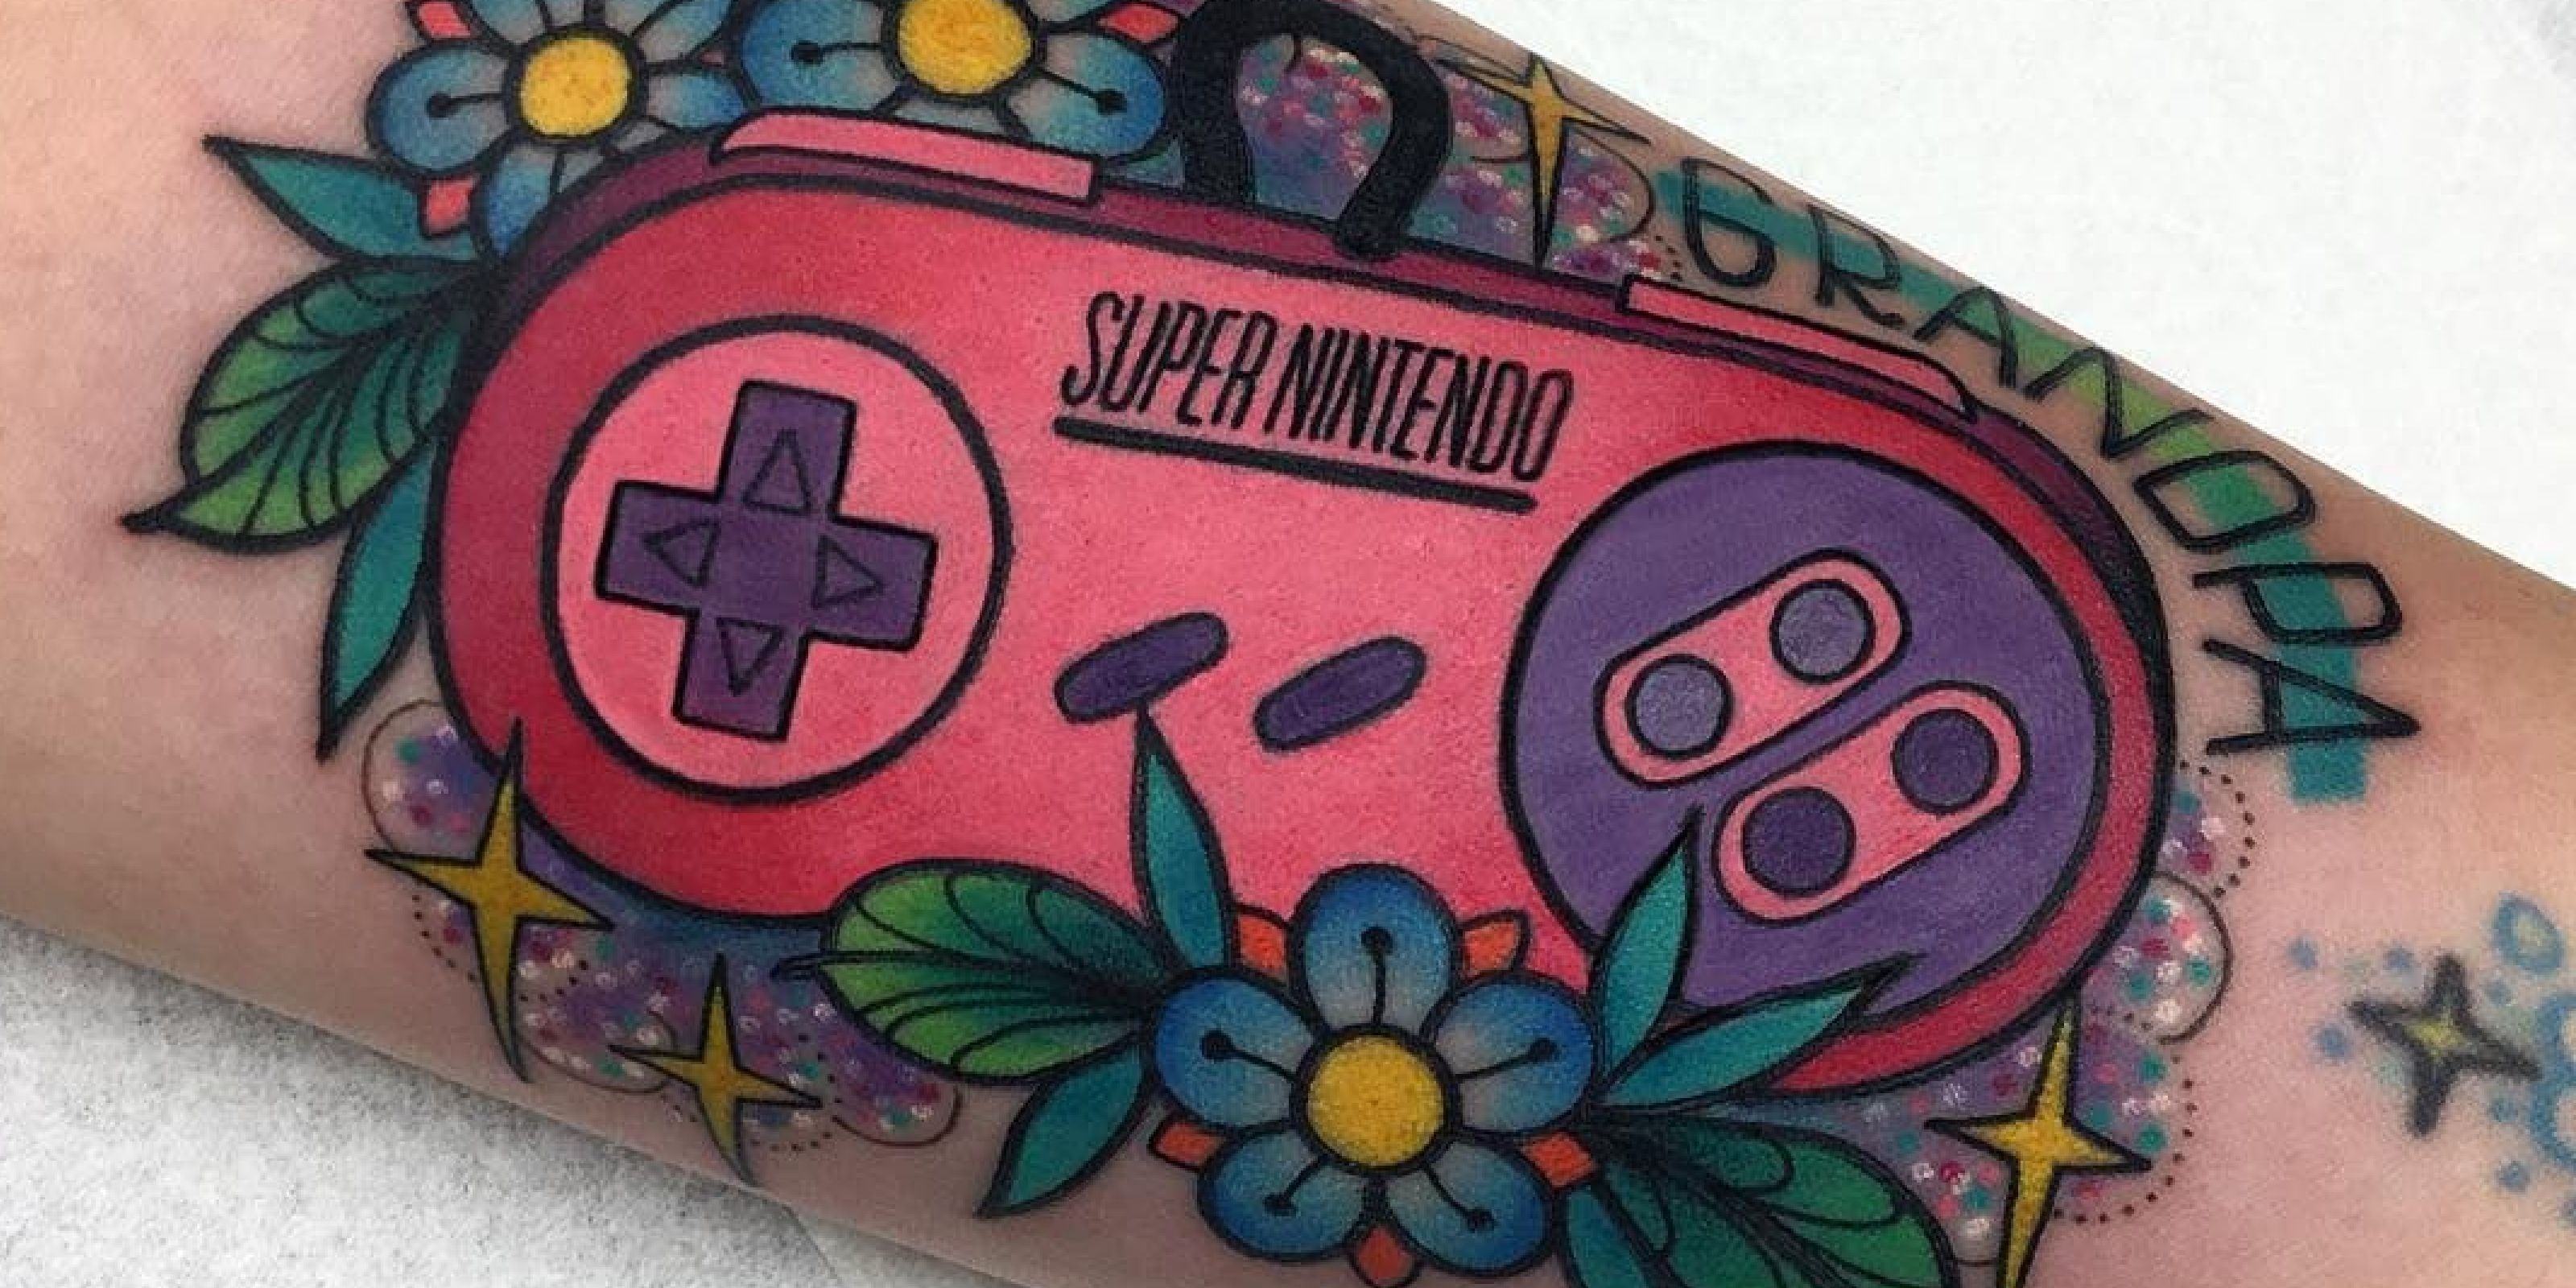 Pink Super Nintendo tattoo with blue flowers.